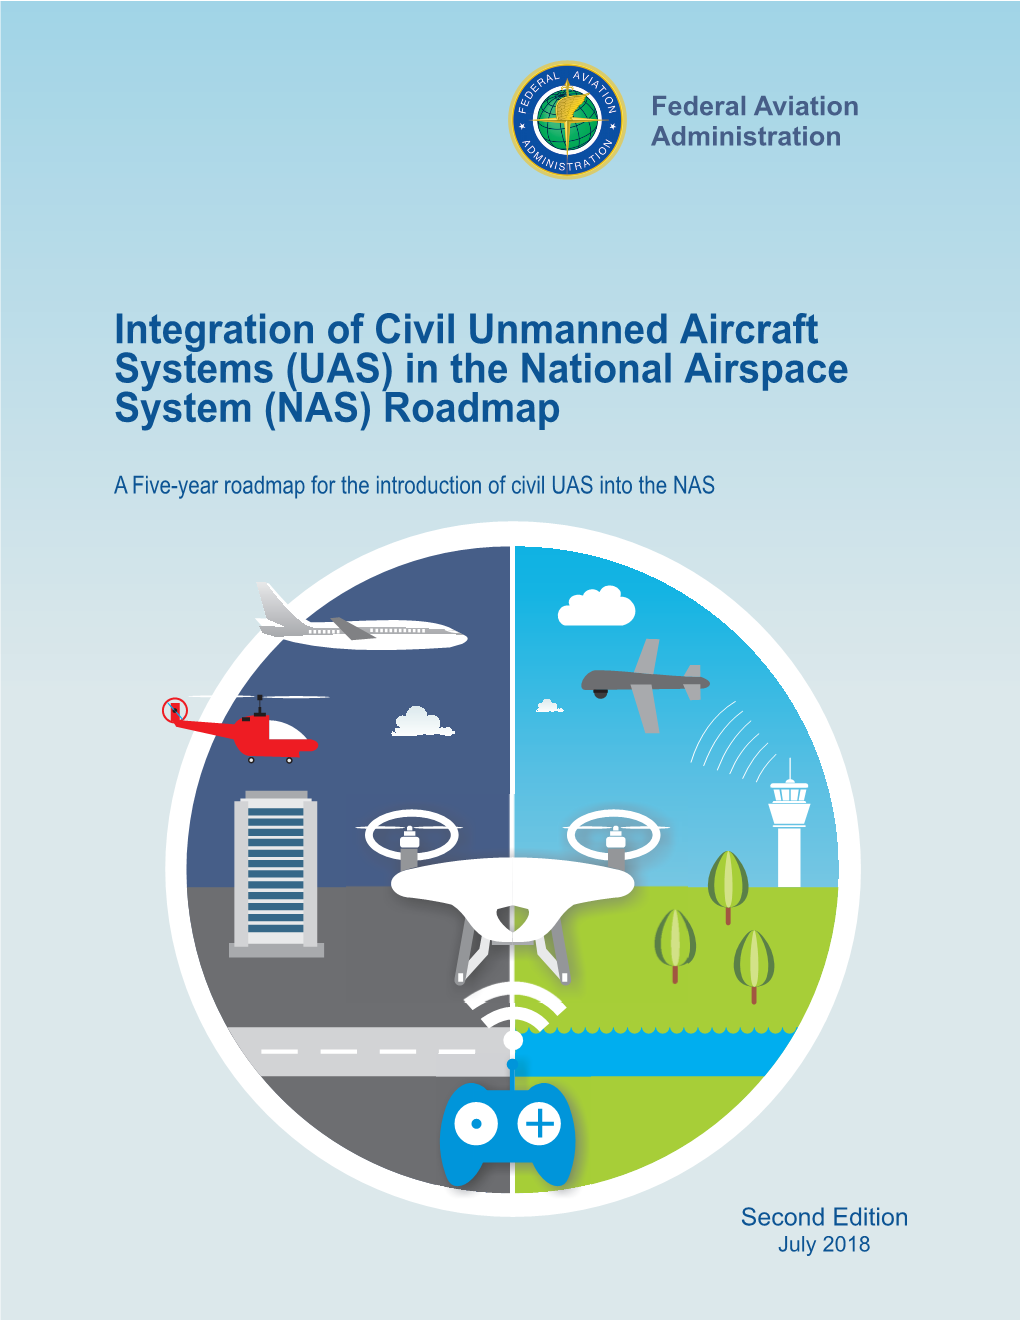 Civi Integration of Civil Unmanned Aircraft Systems (UAS) in the National Airspace System (NAS) Roadmap